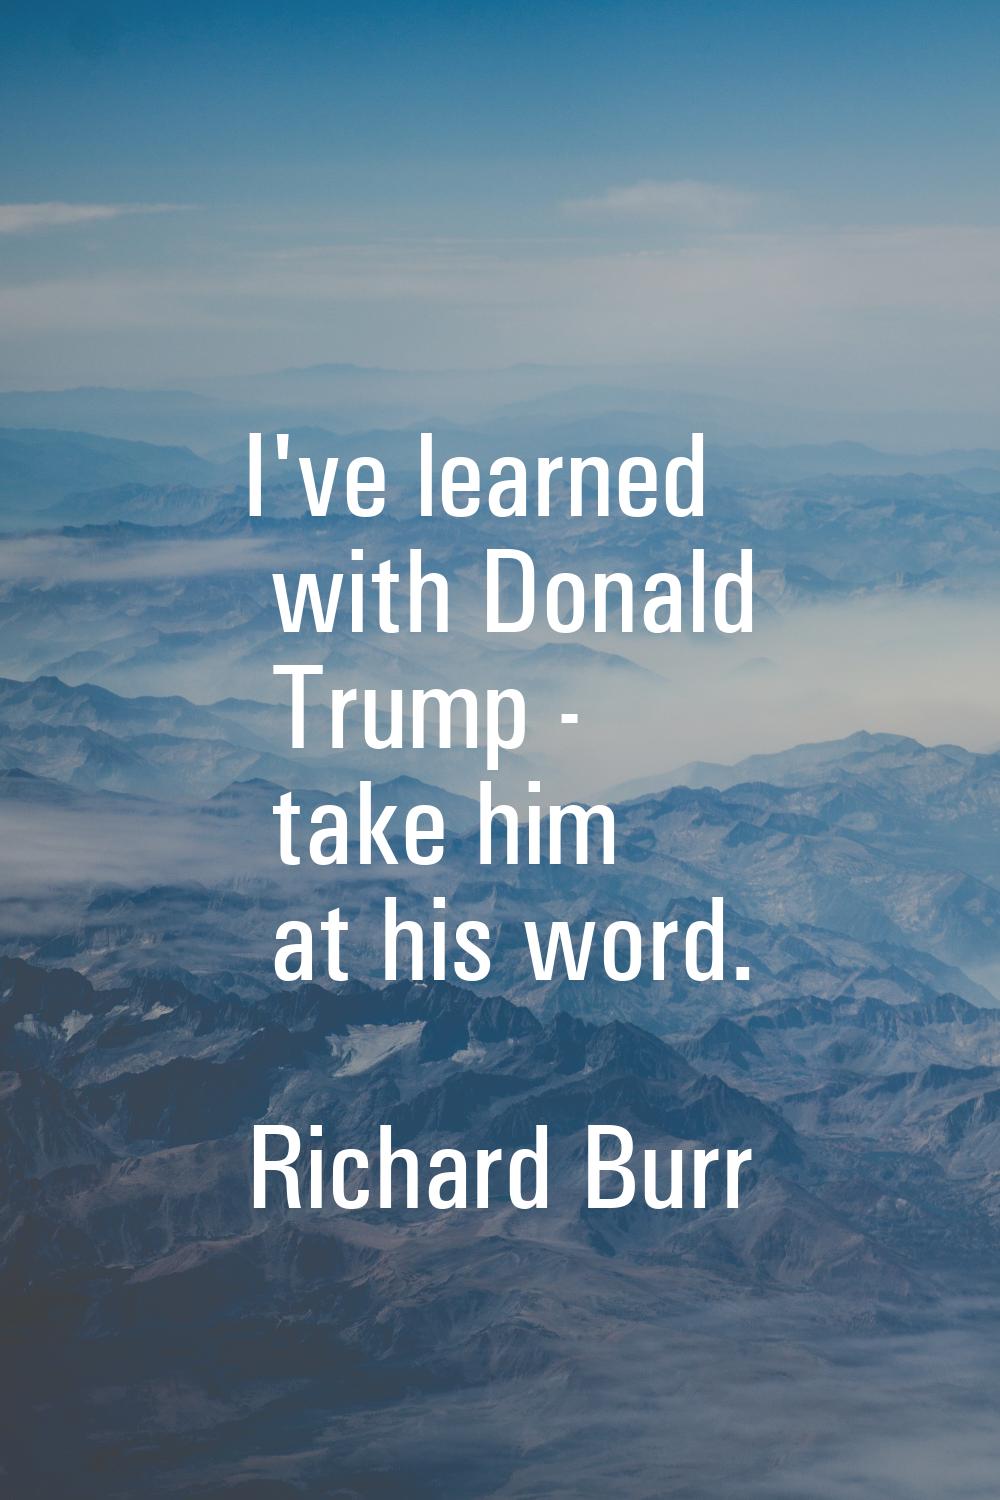 I've learned with Donald Trump - take him at his word.